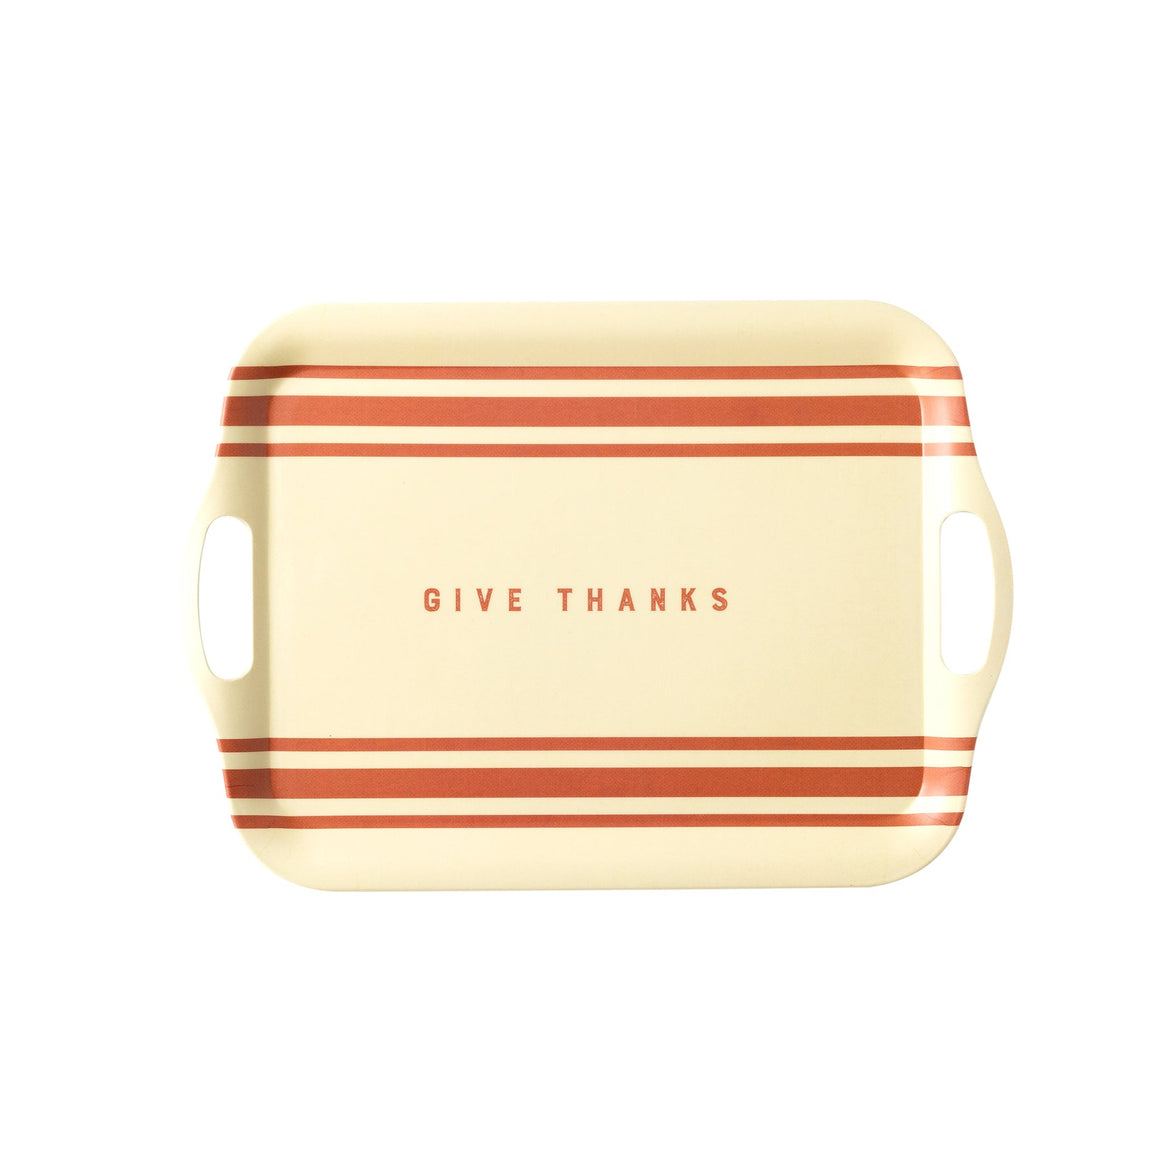 Give Thanks Striped Reusable Bamboo Tray